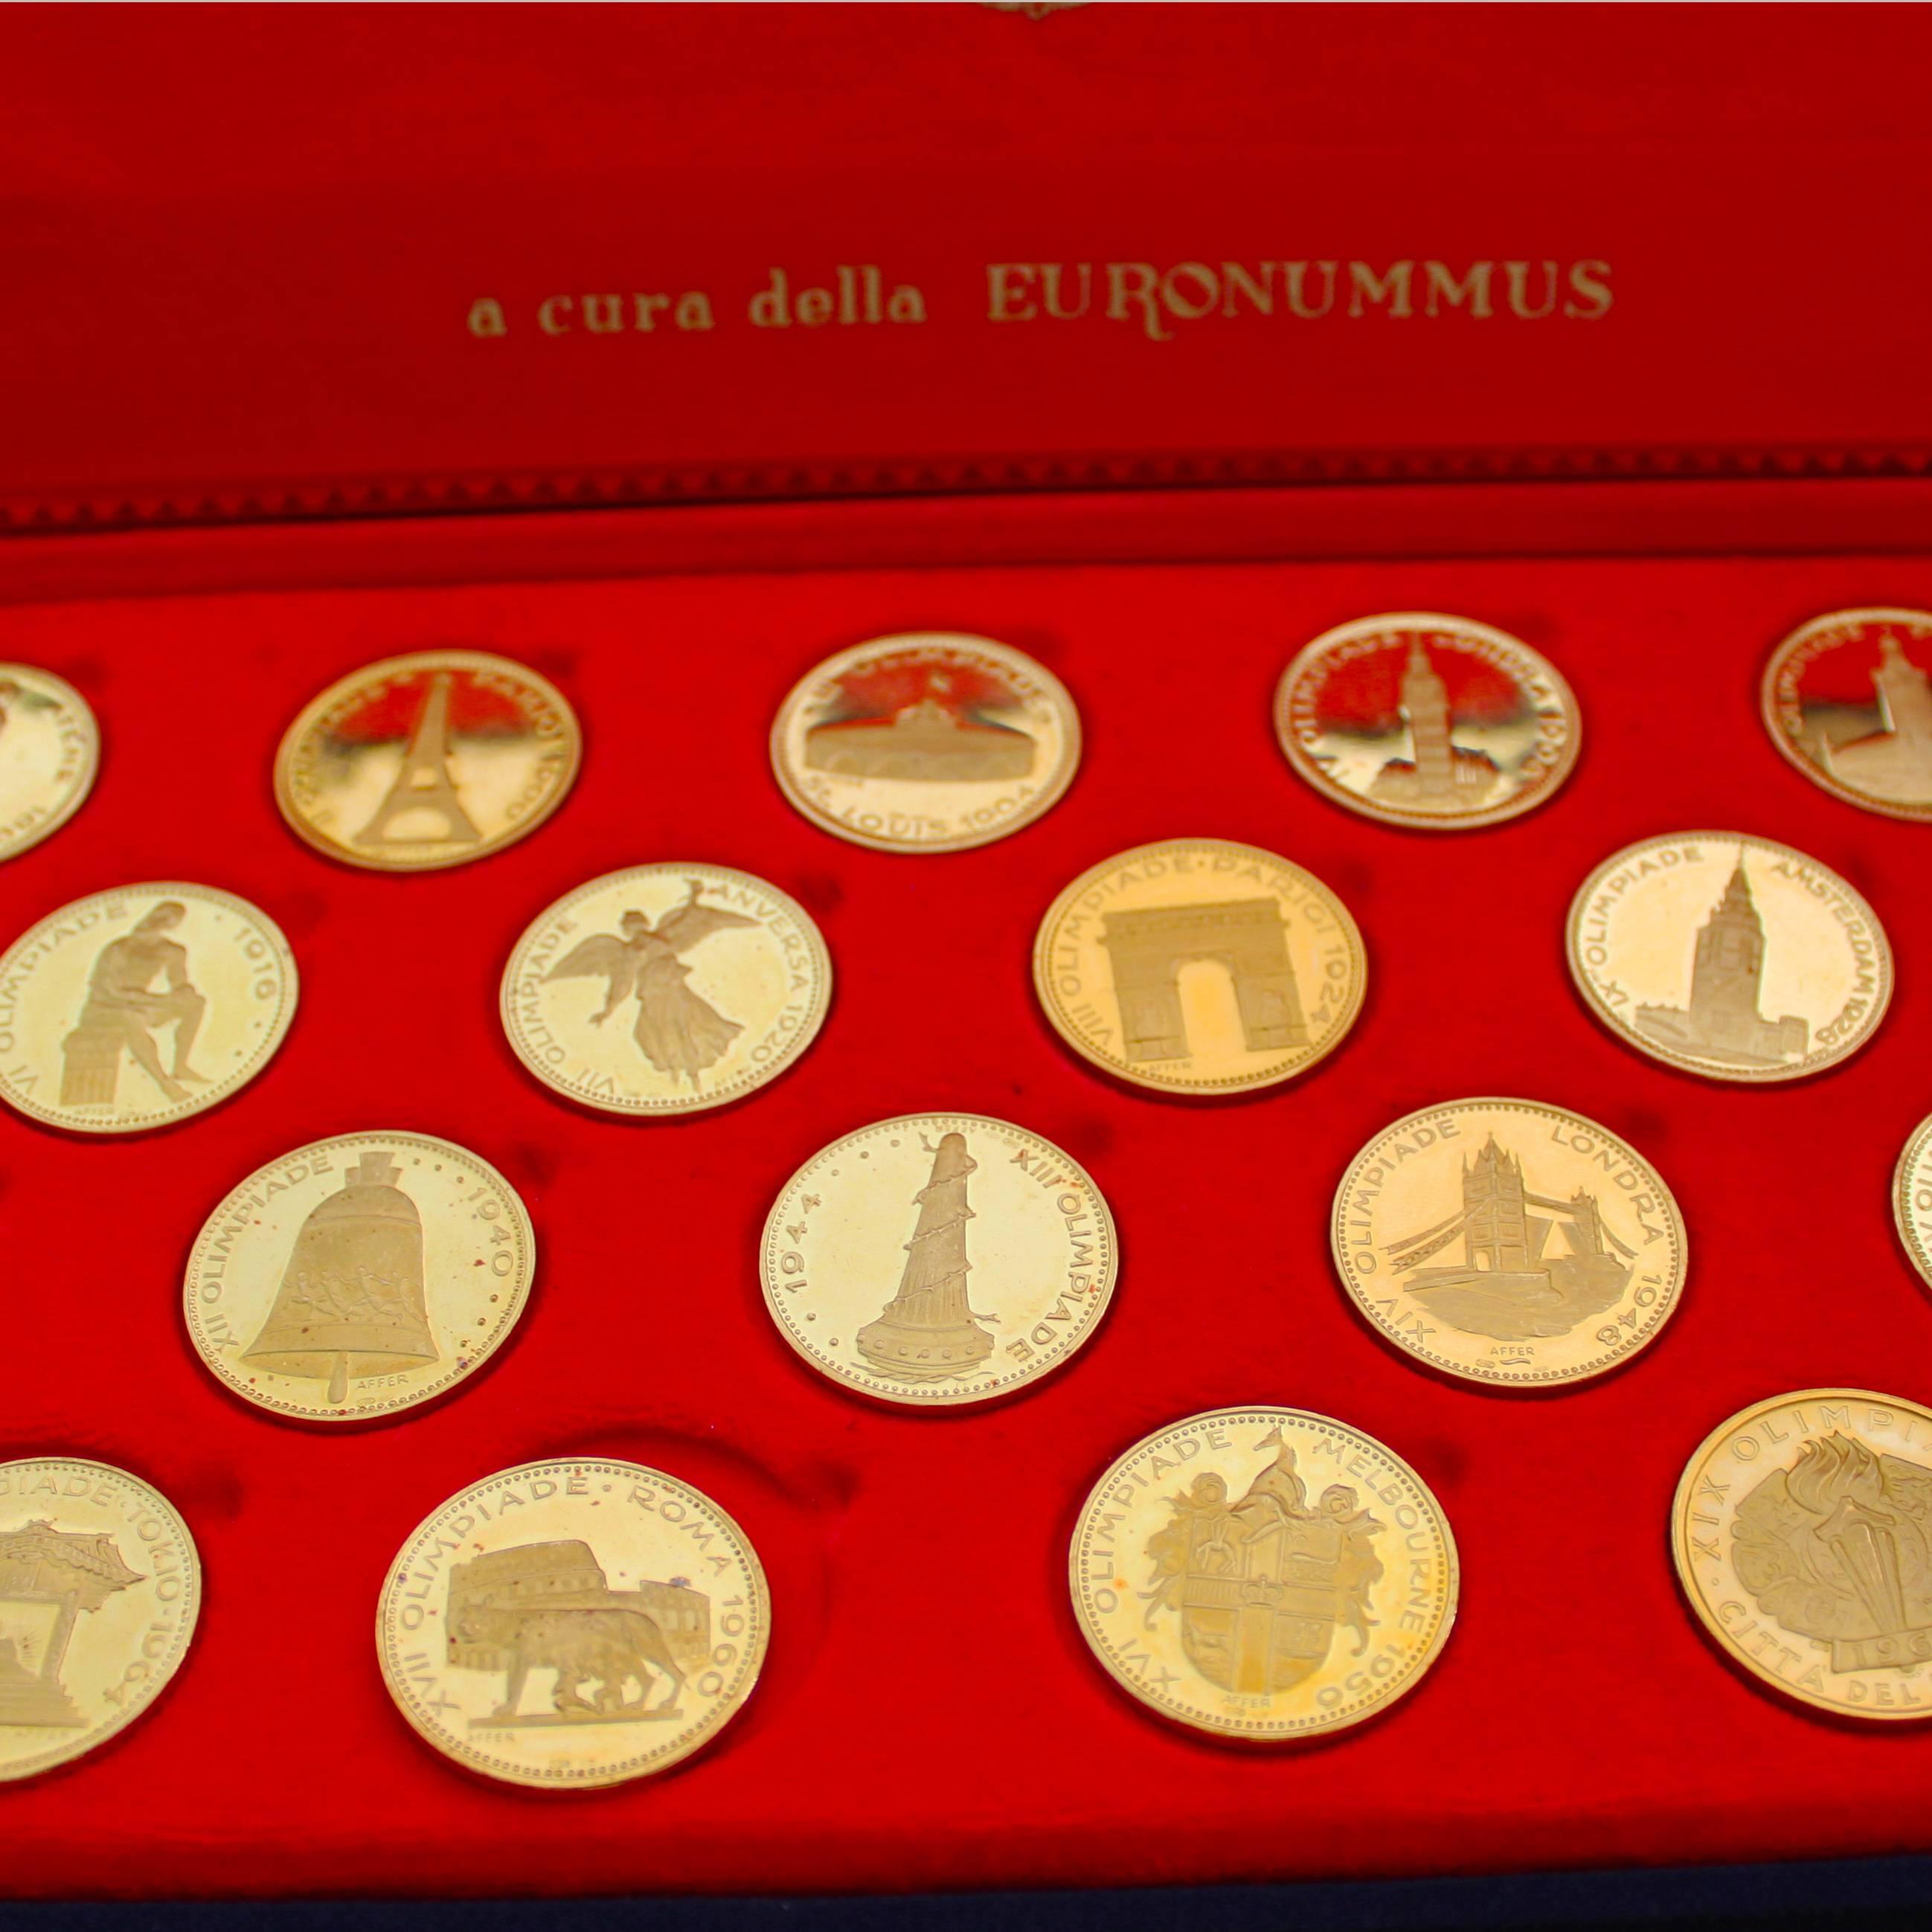 A rare and beautiful Olympic Gold Coins Set.

The set consists of 20 gold coins (22k yellow gold), each depicting the first twenty New Olympic Games from 1896 to 1972 with their locations and city landmarks on one side and the Olympic Torch Bearer